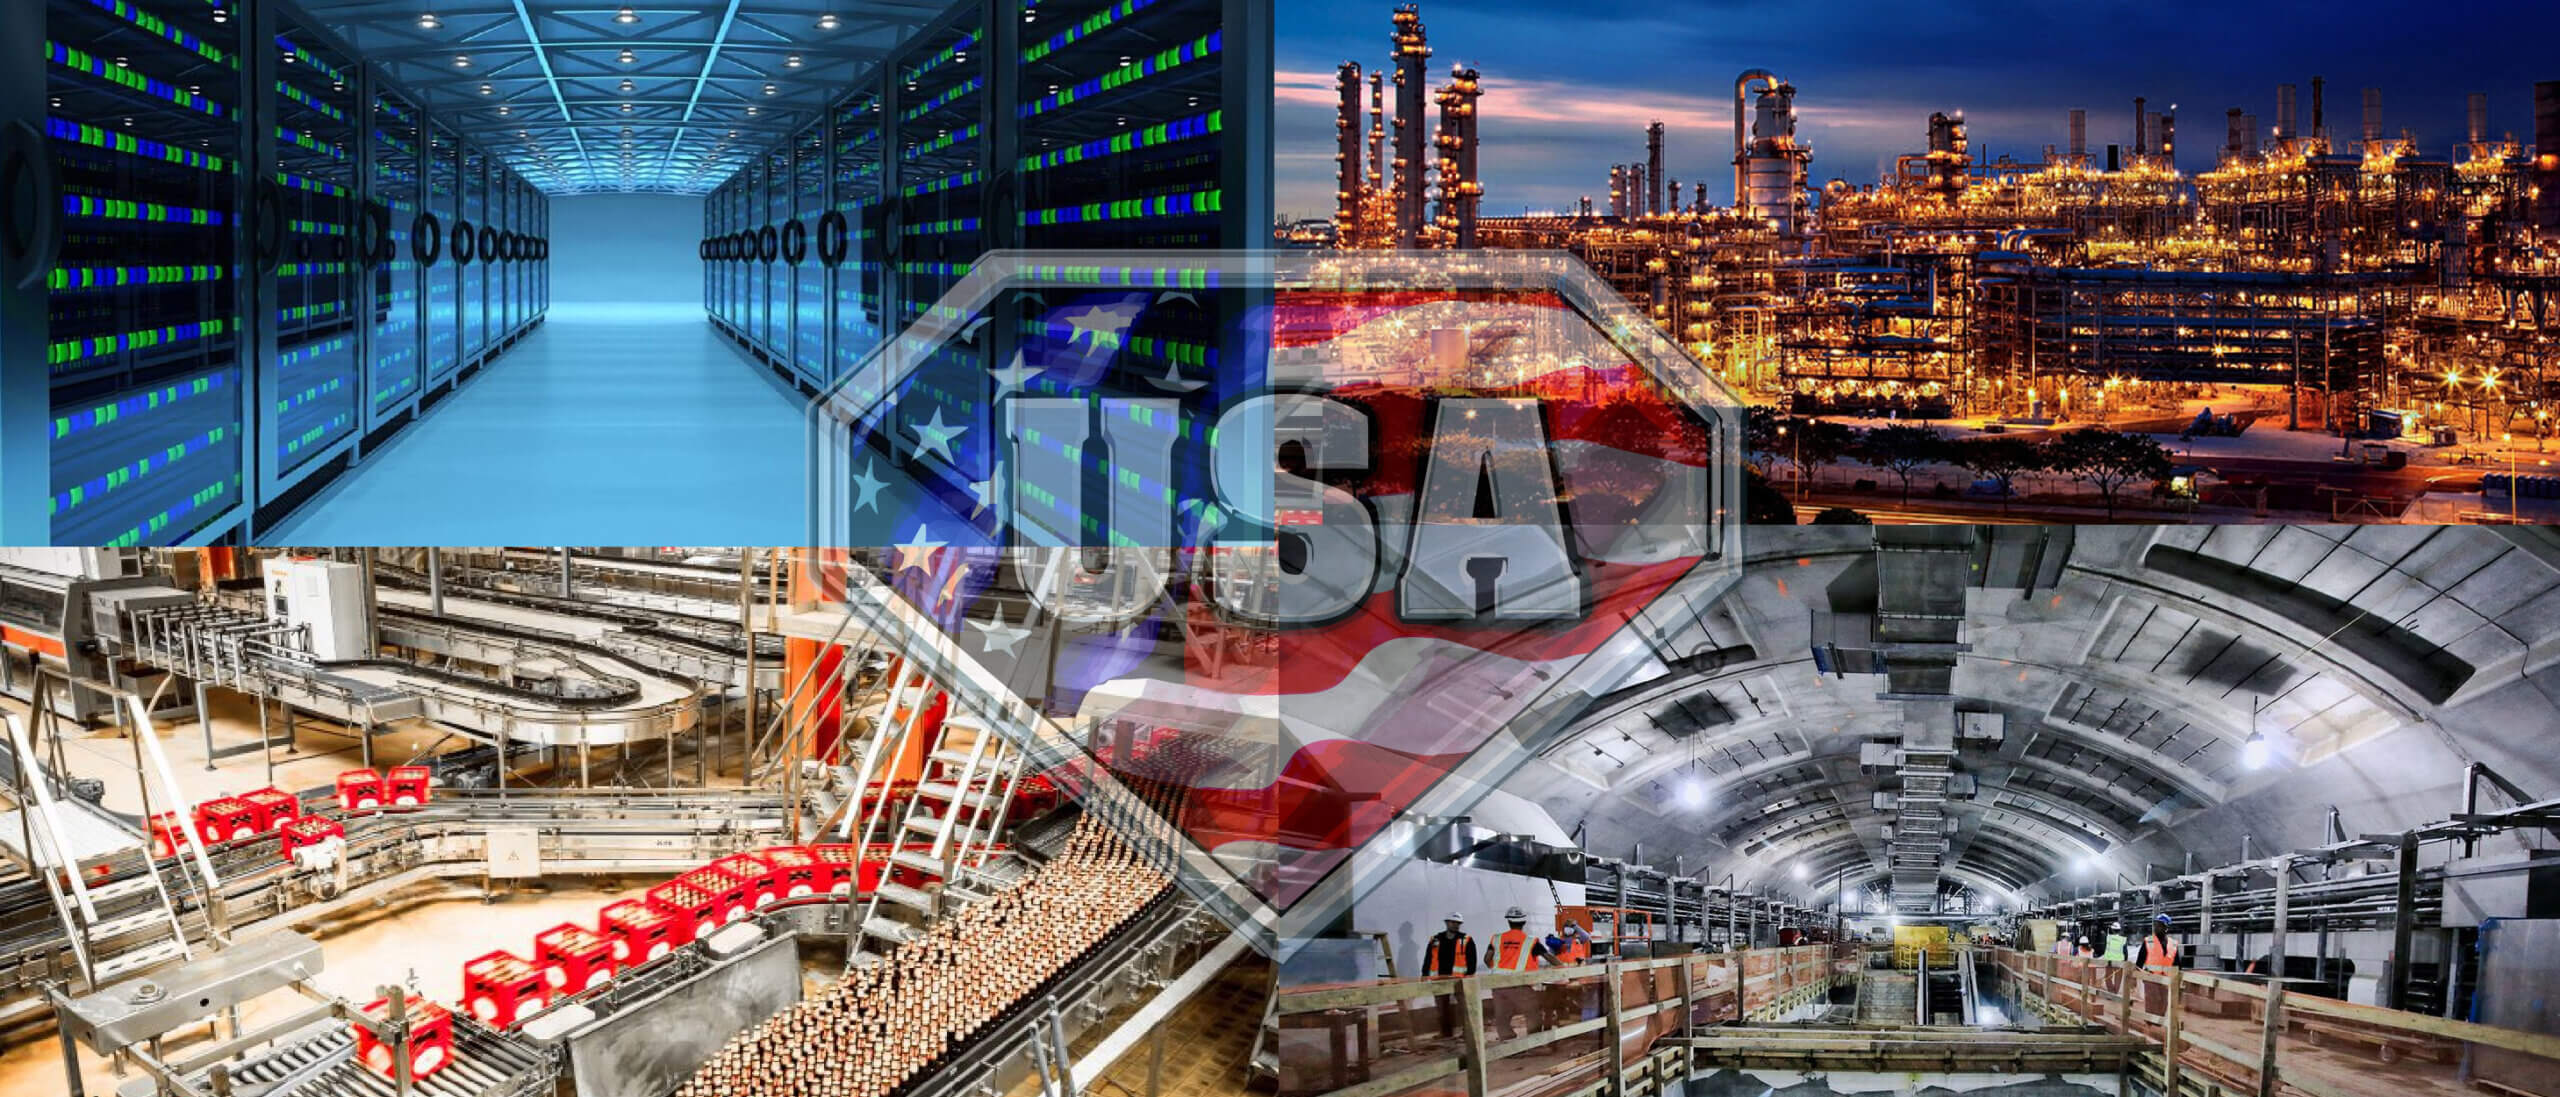 American Fittings Steel Electrical Fittings Made in the USA